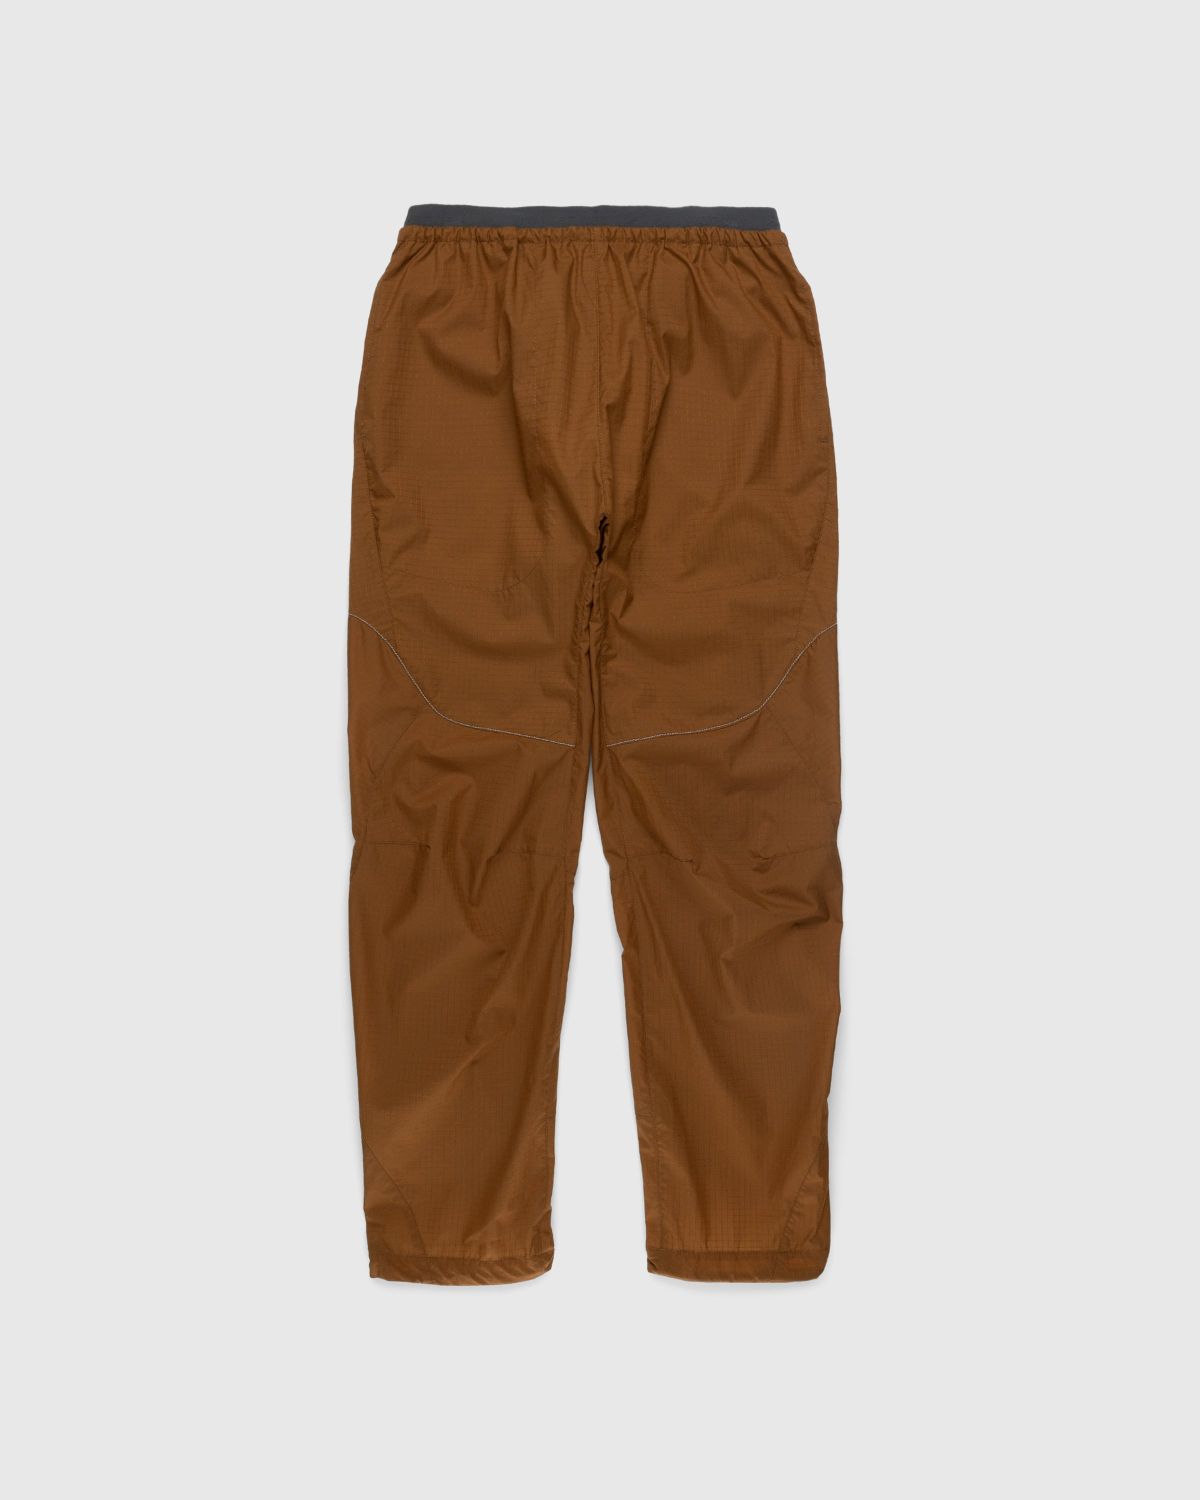 And Wander – Breath Ripstop Light Pants Brown | Highsnobiety Shop